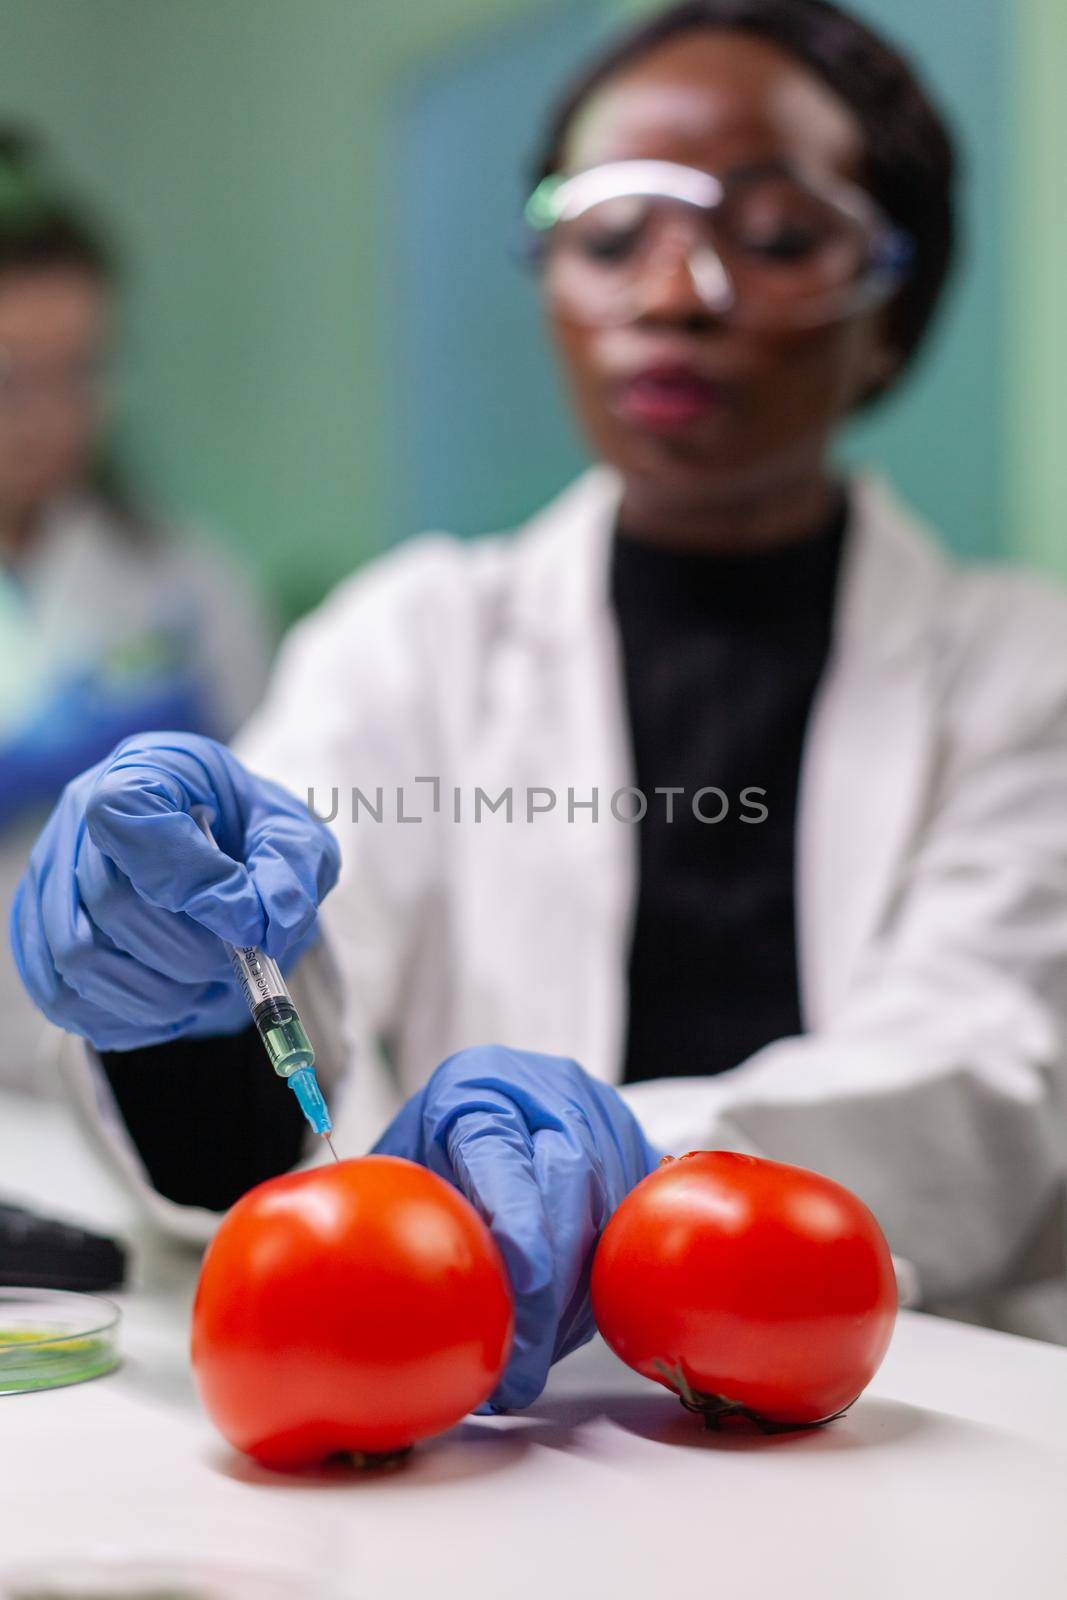 Closeup of chemist scientist injecting organic tomato with pesticides for gmo test. Biochemist working in pharmacology laboratory testing health food for microbiology expertise.